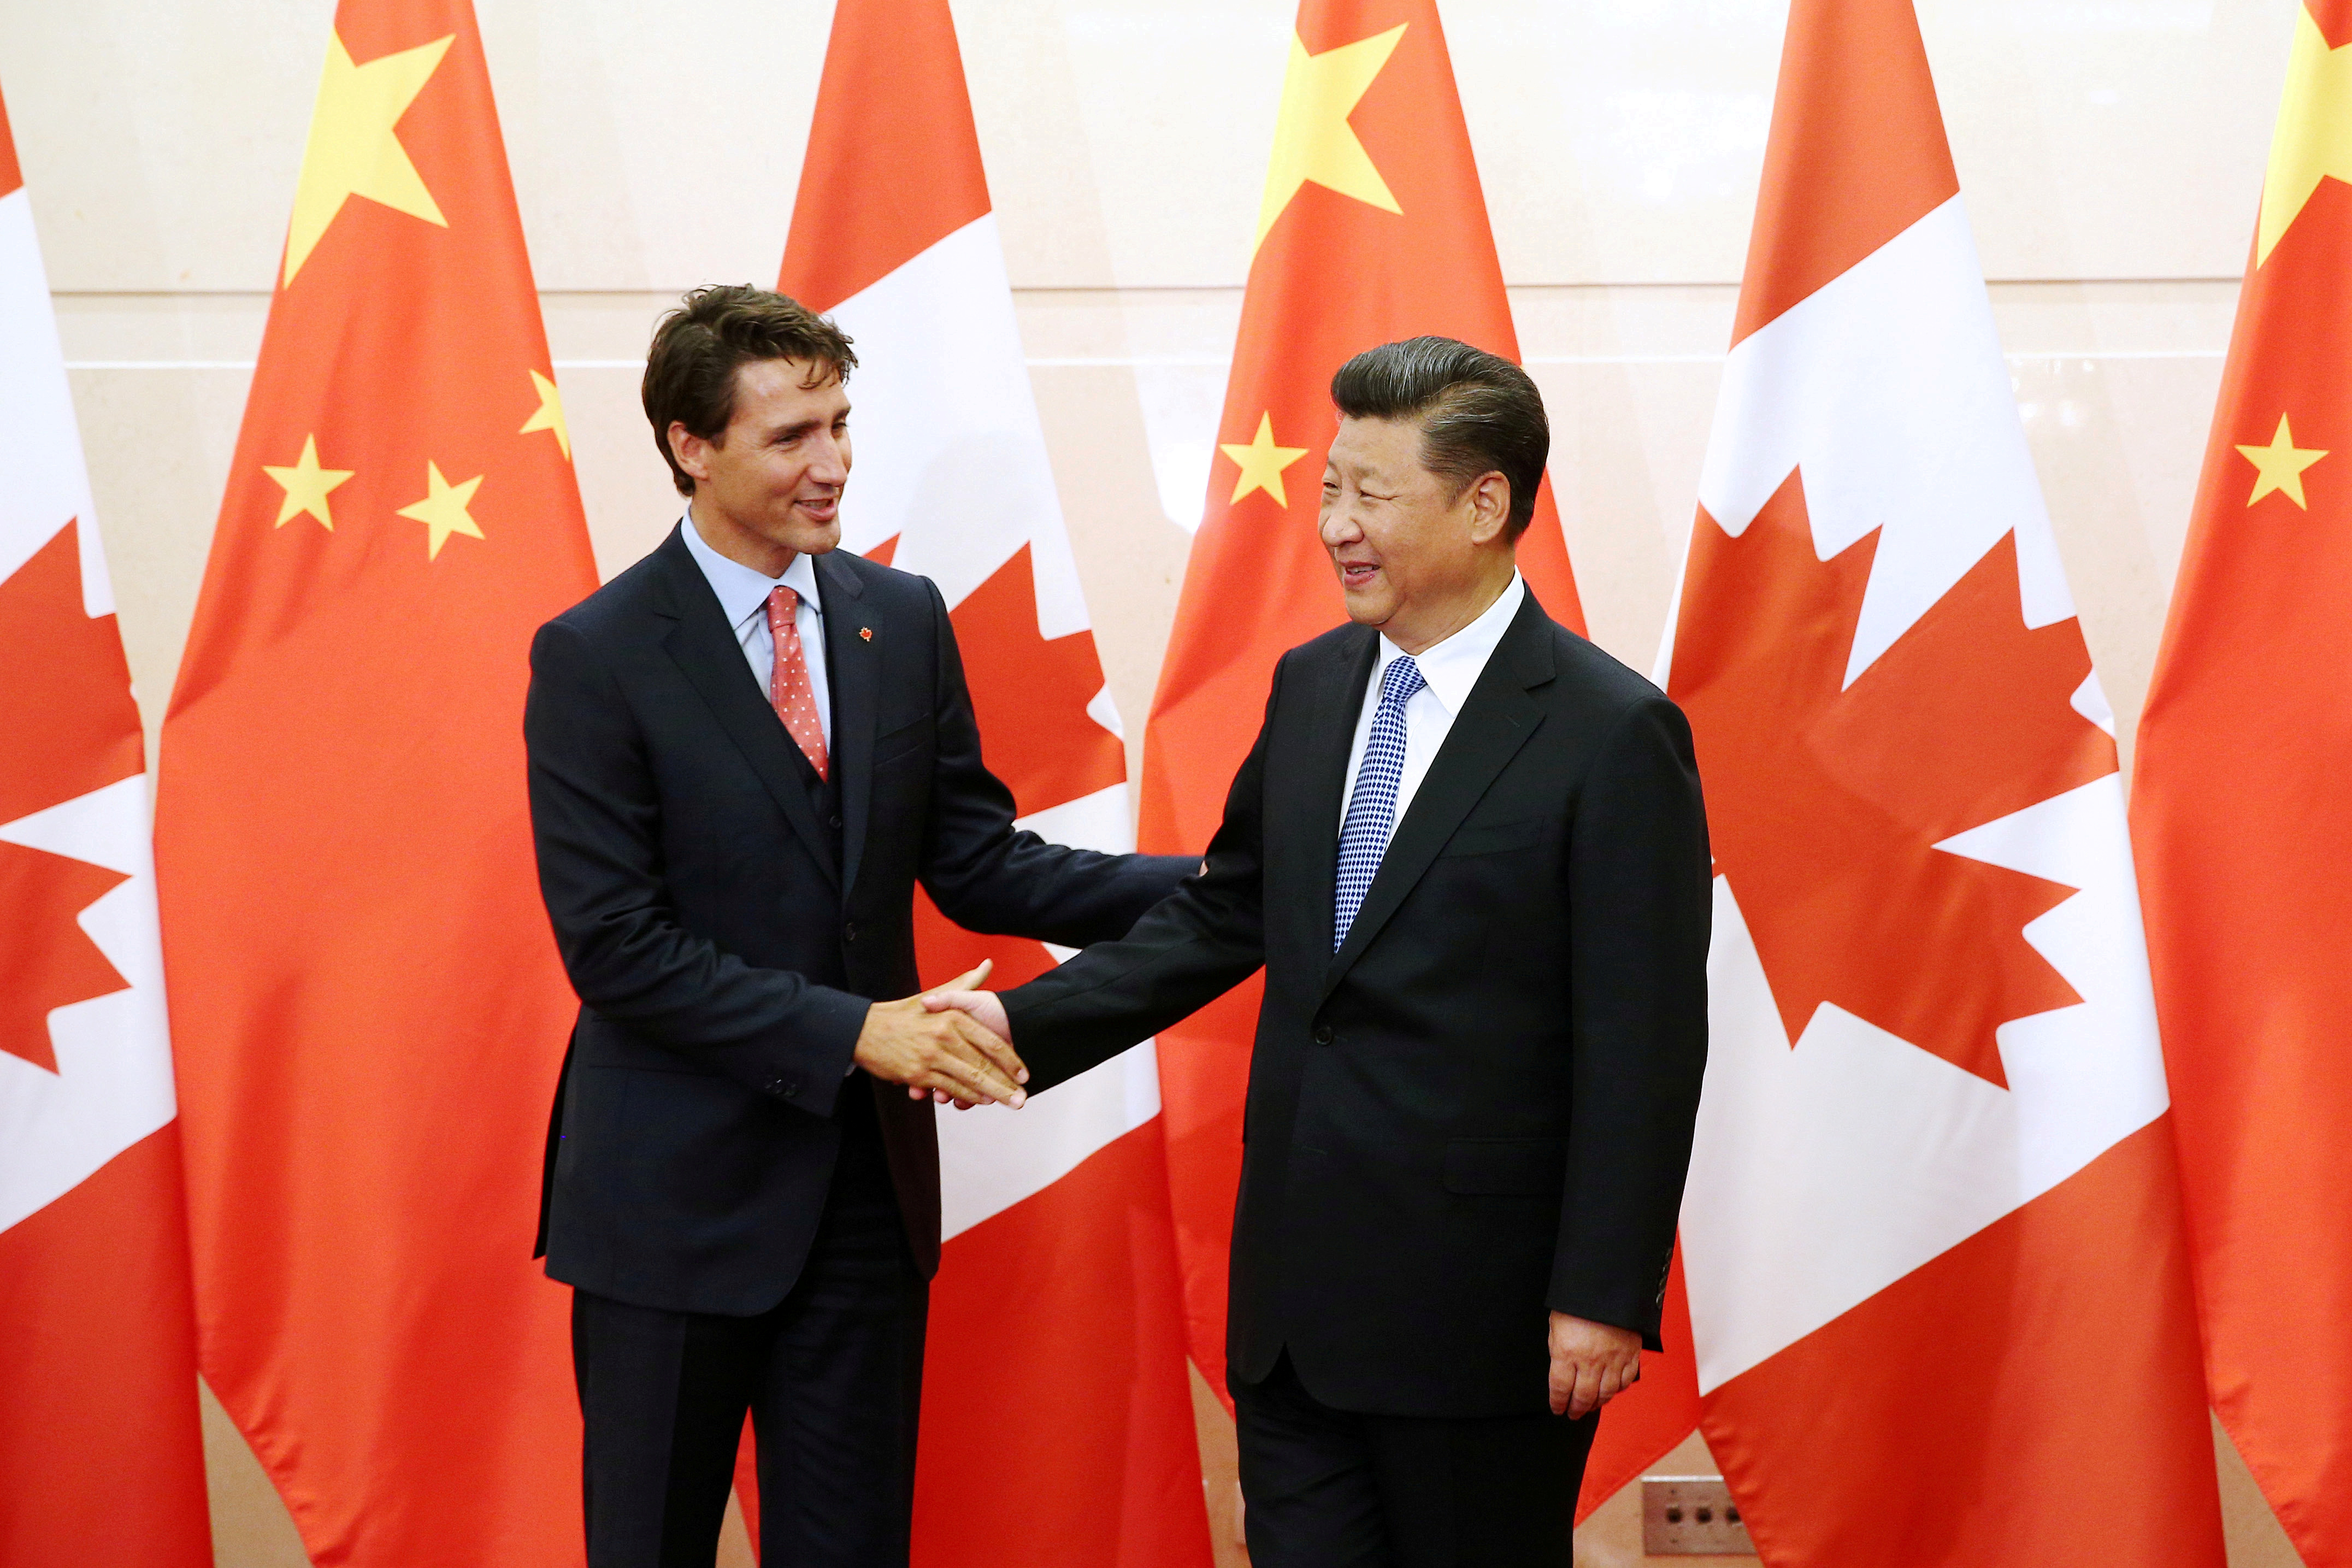 Chinese President Xi Jinping shakes hands with Canadian Prime Minister Trudeau ahead of their meeting at the Diaoyutai State Guesthouse in Beijing